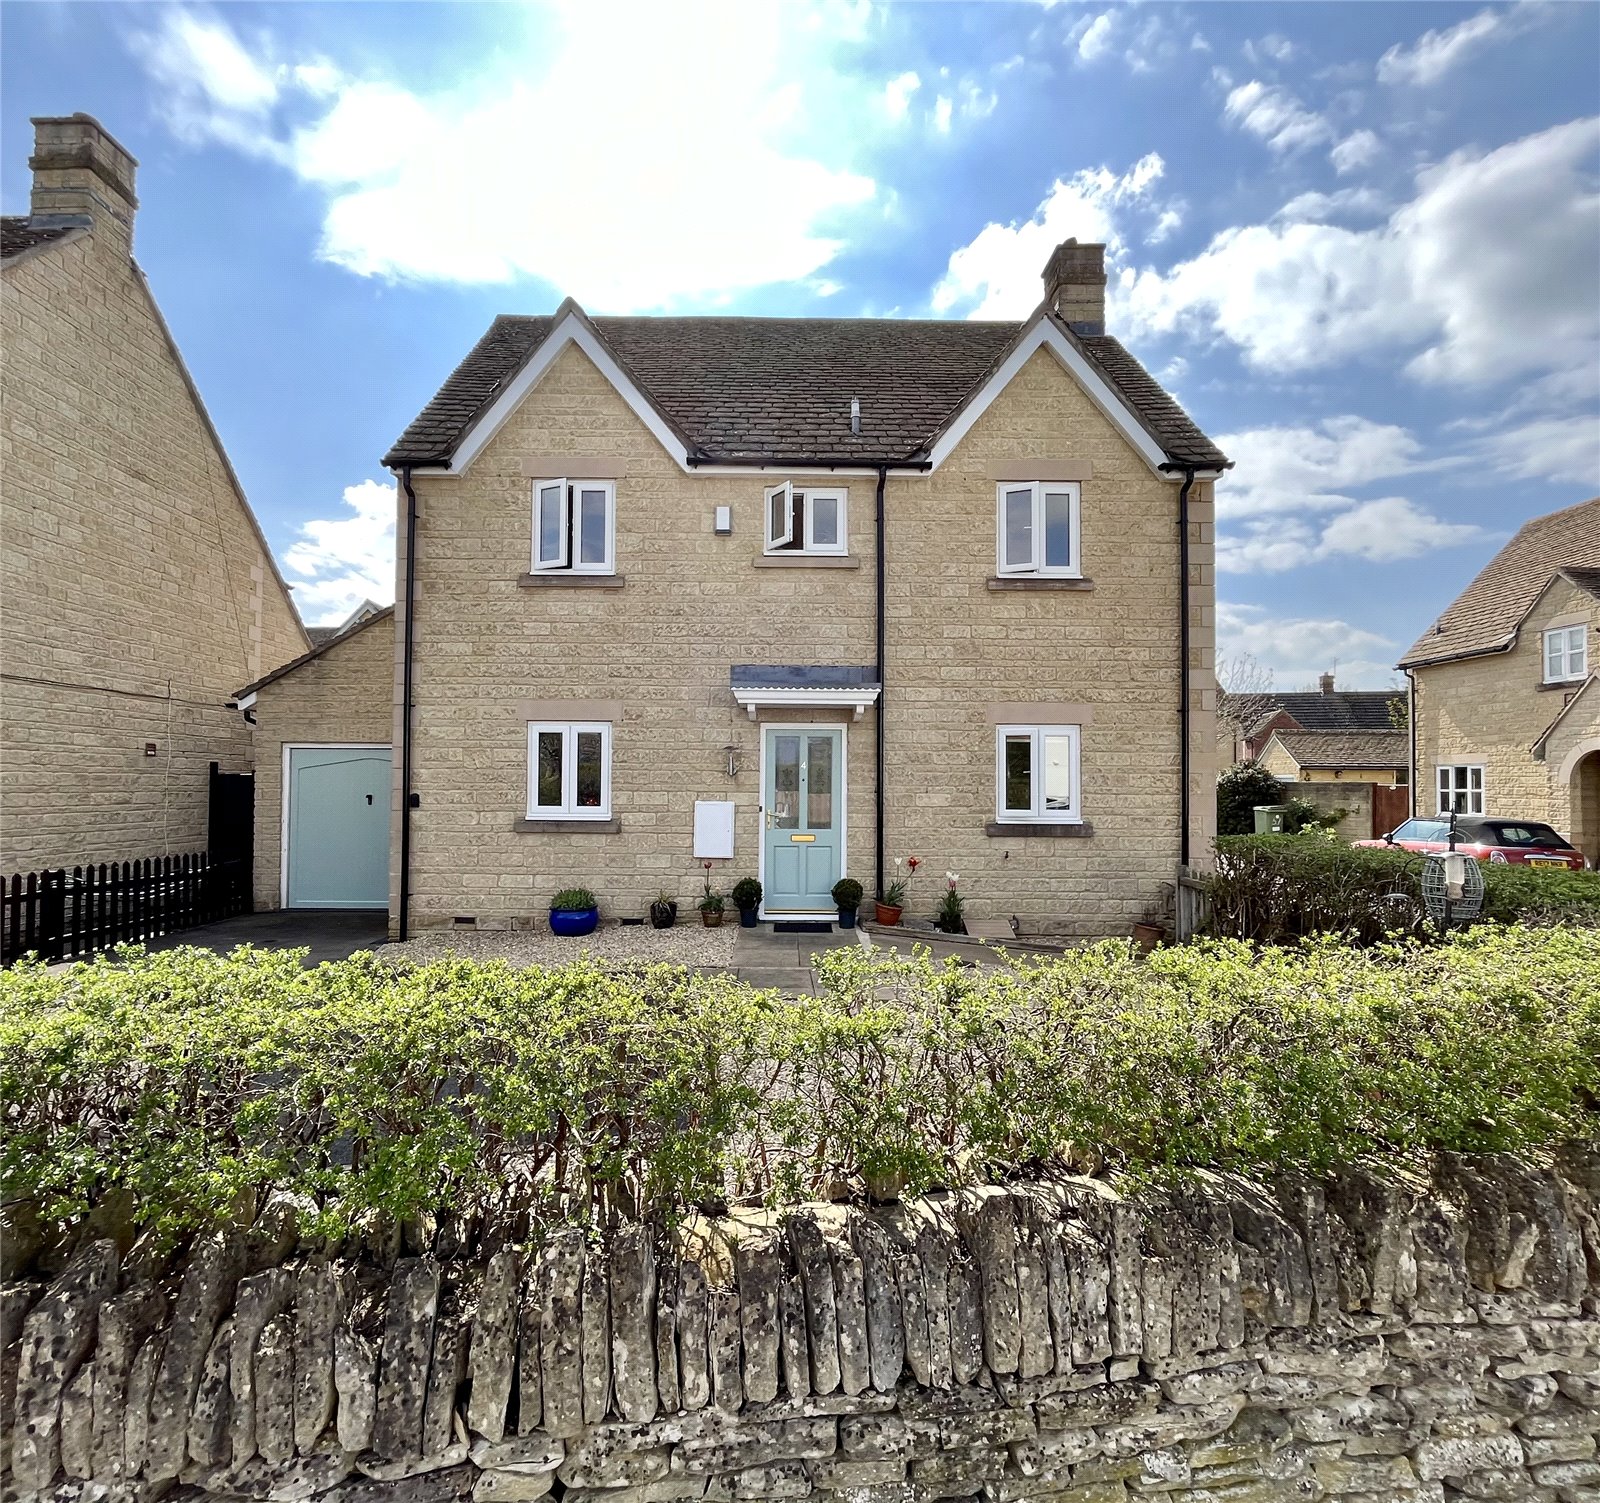 Linden Lea, Down Ampney, Cirencester, GL7